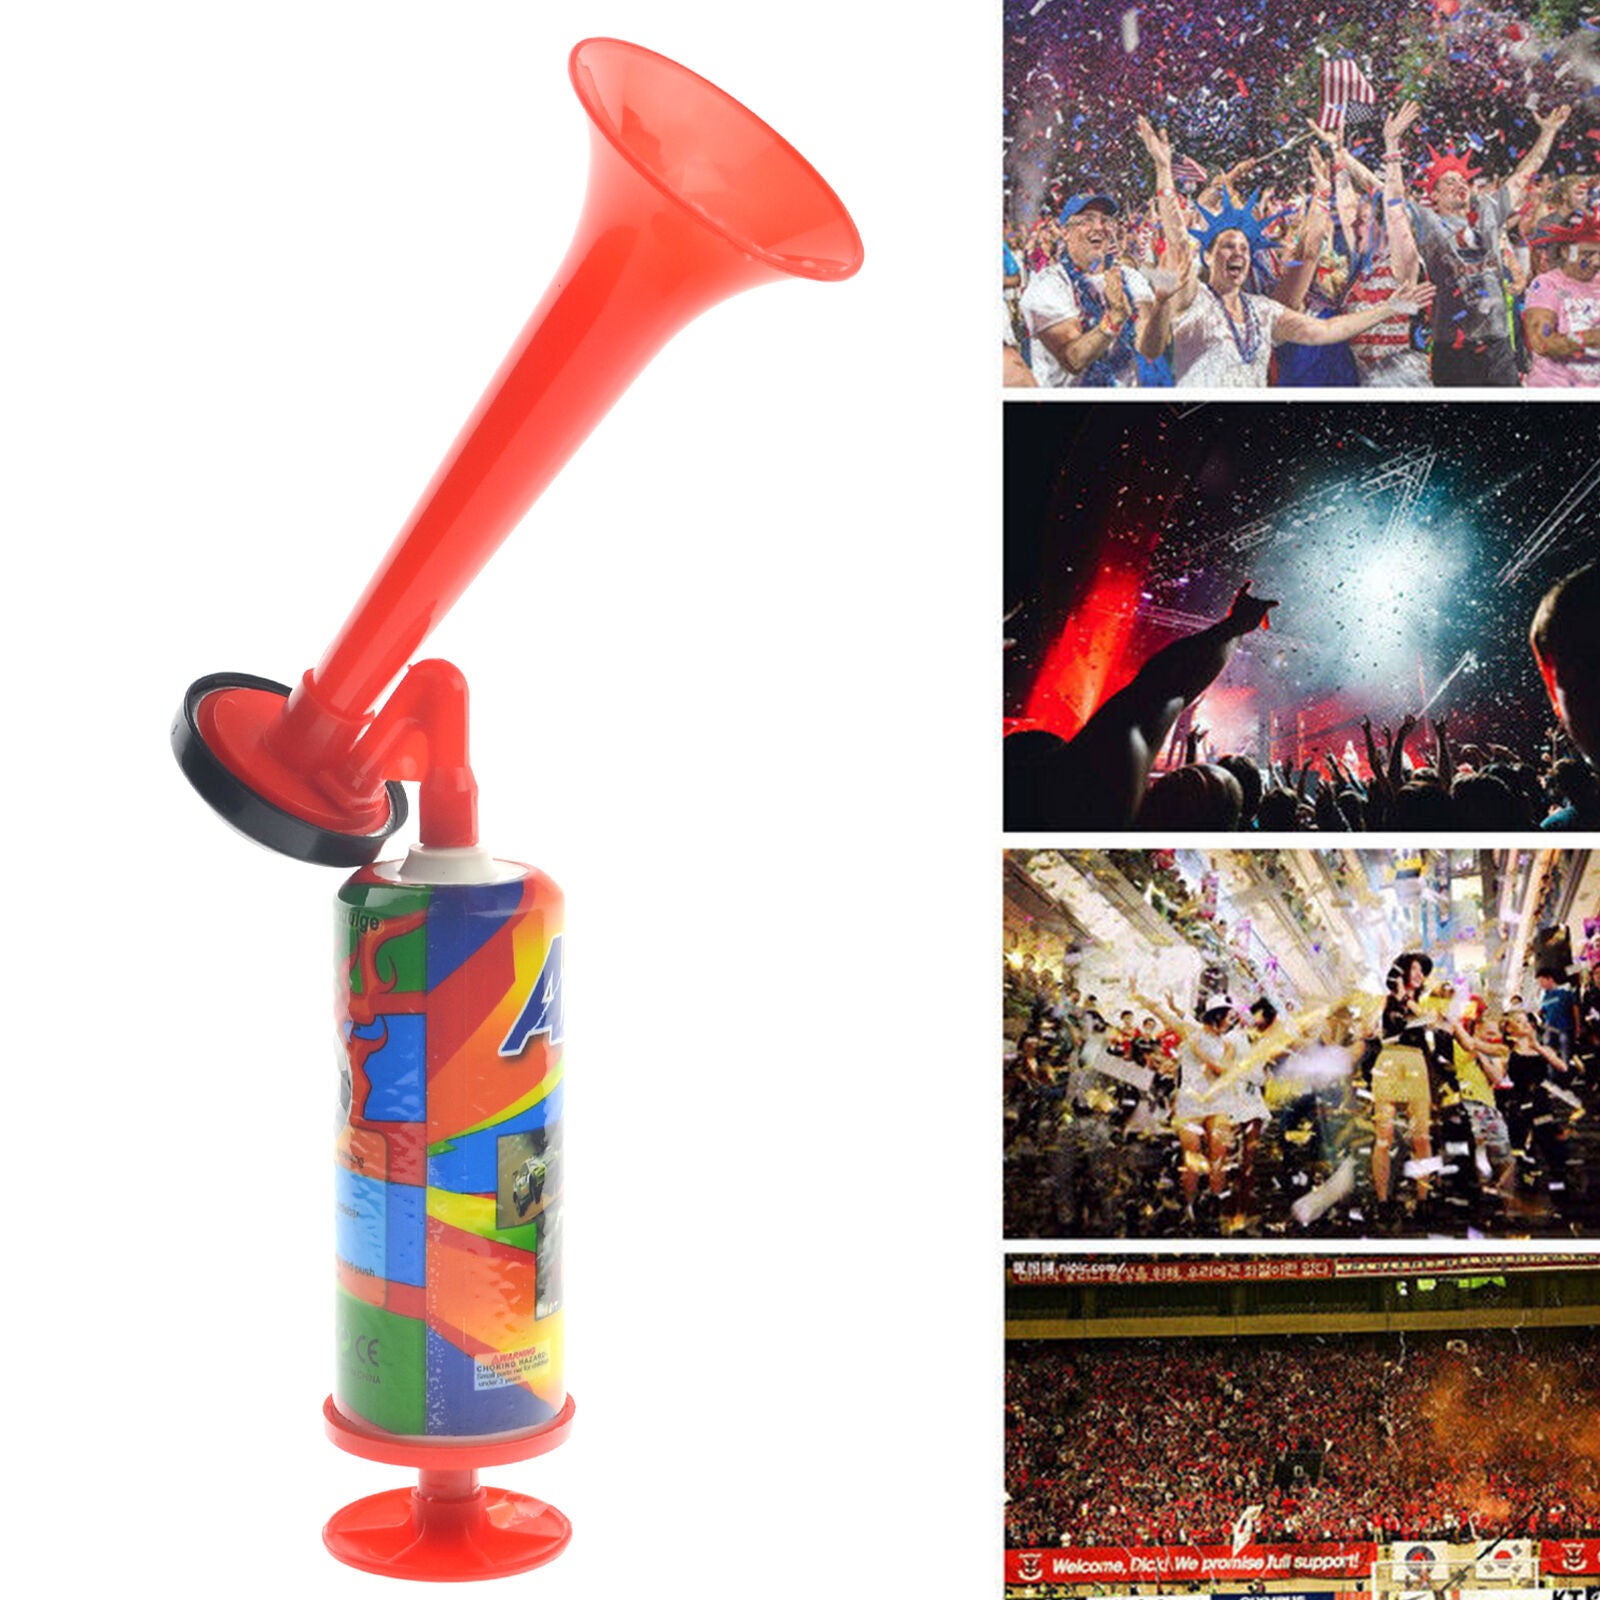 Air Horn Hand Held Pump Loud Blast Sporting Event Boating Bear Safety Cheering